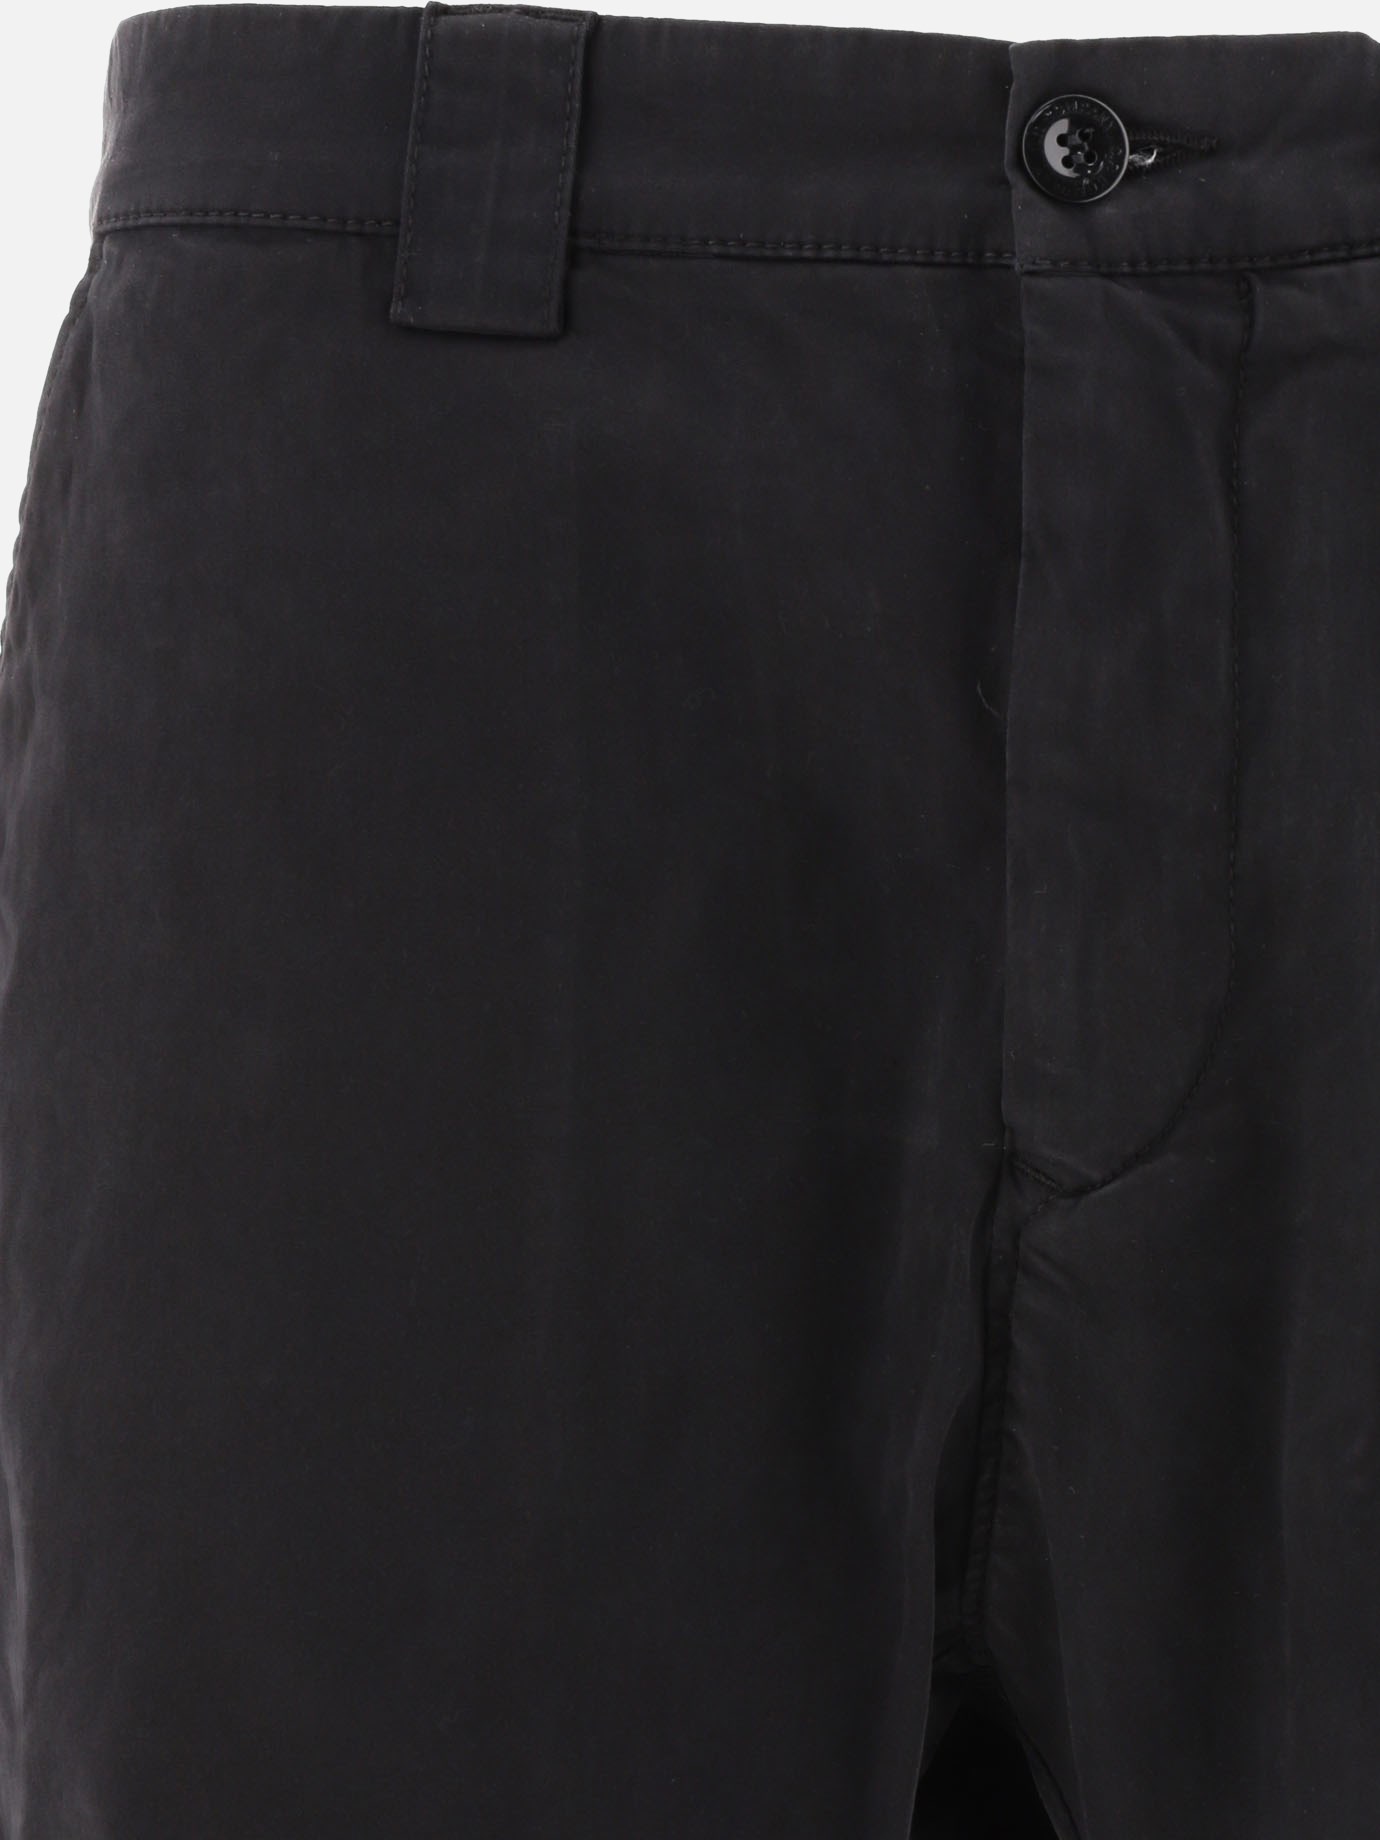  Sateen  cargo trousers by C.P. Company